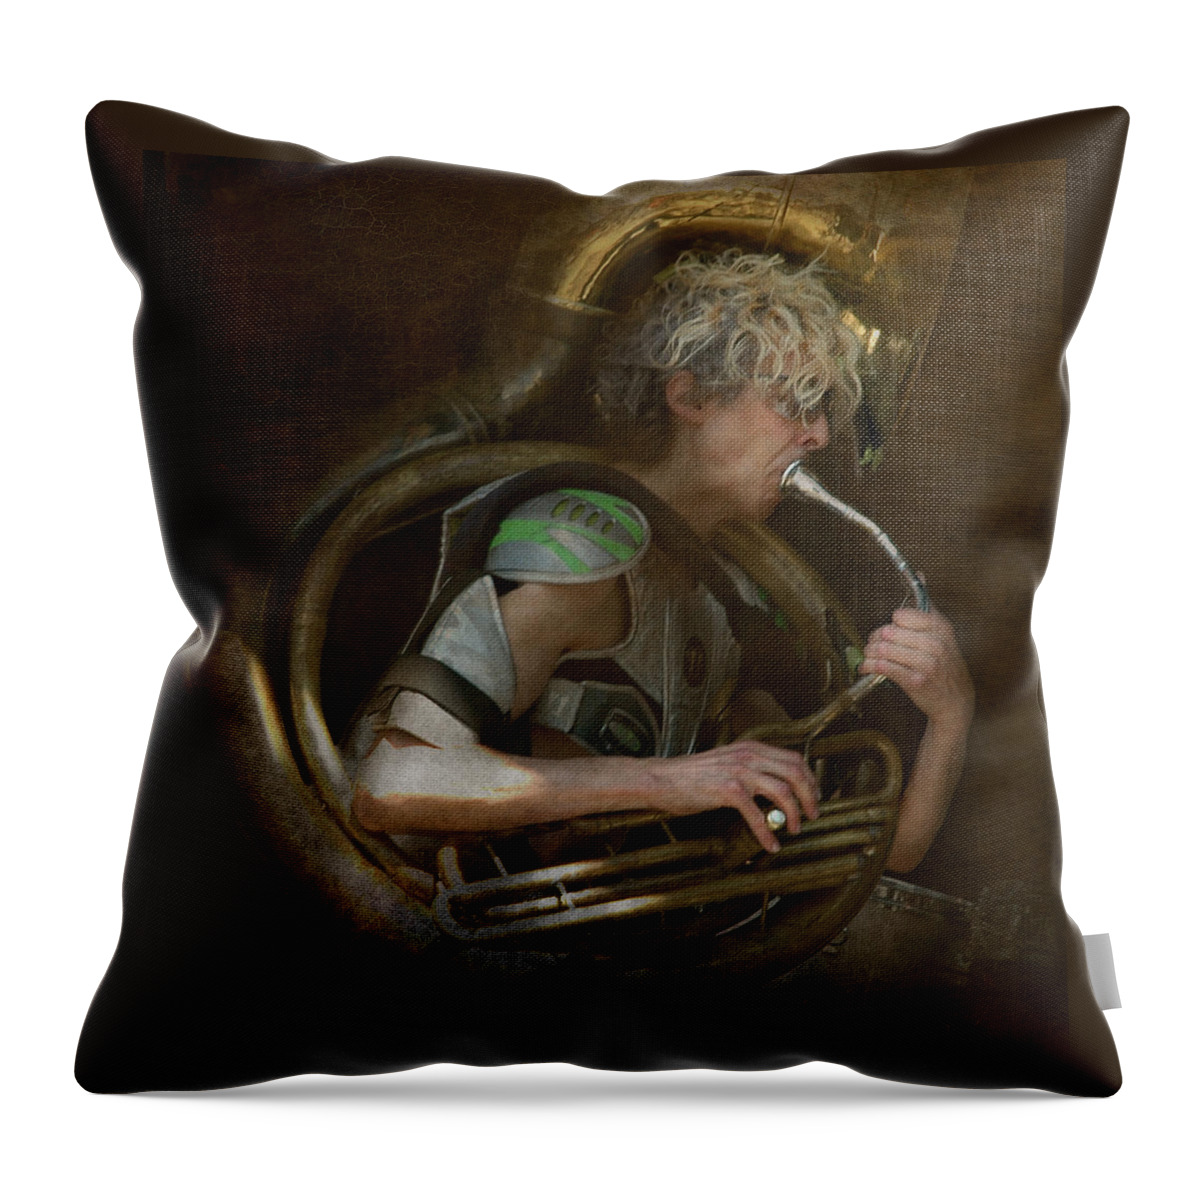 Freemont Fair Throw Pillow featuring the photograph The man - The Tuba by Jeff Burgess